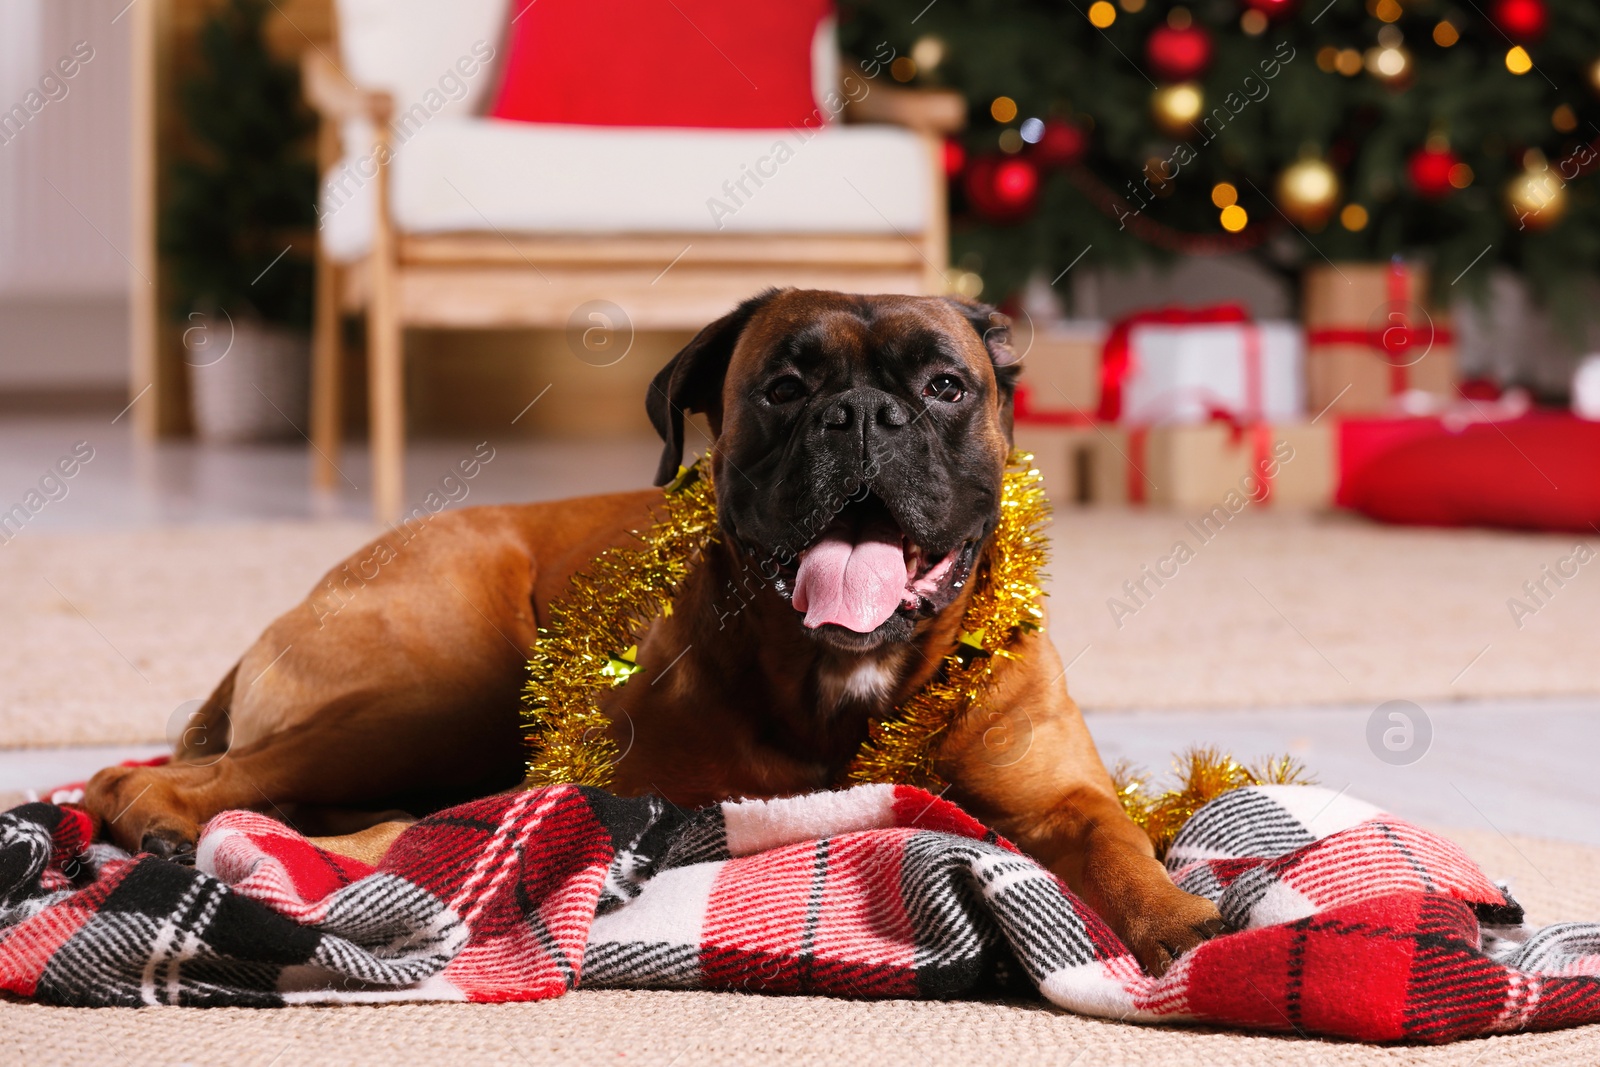 Photo of Cute dog with colorful tinsel in room decorated for Christmas